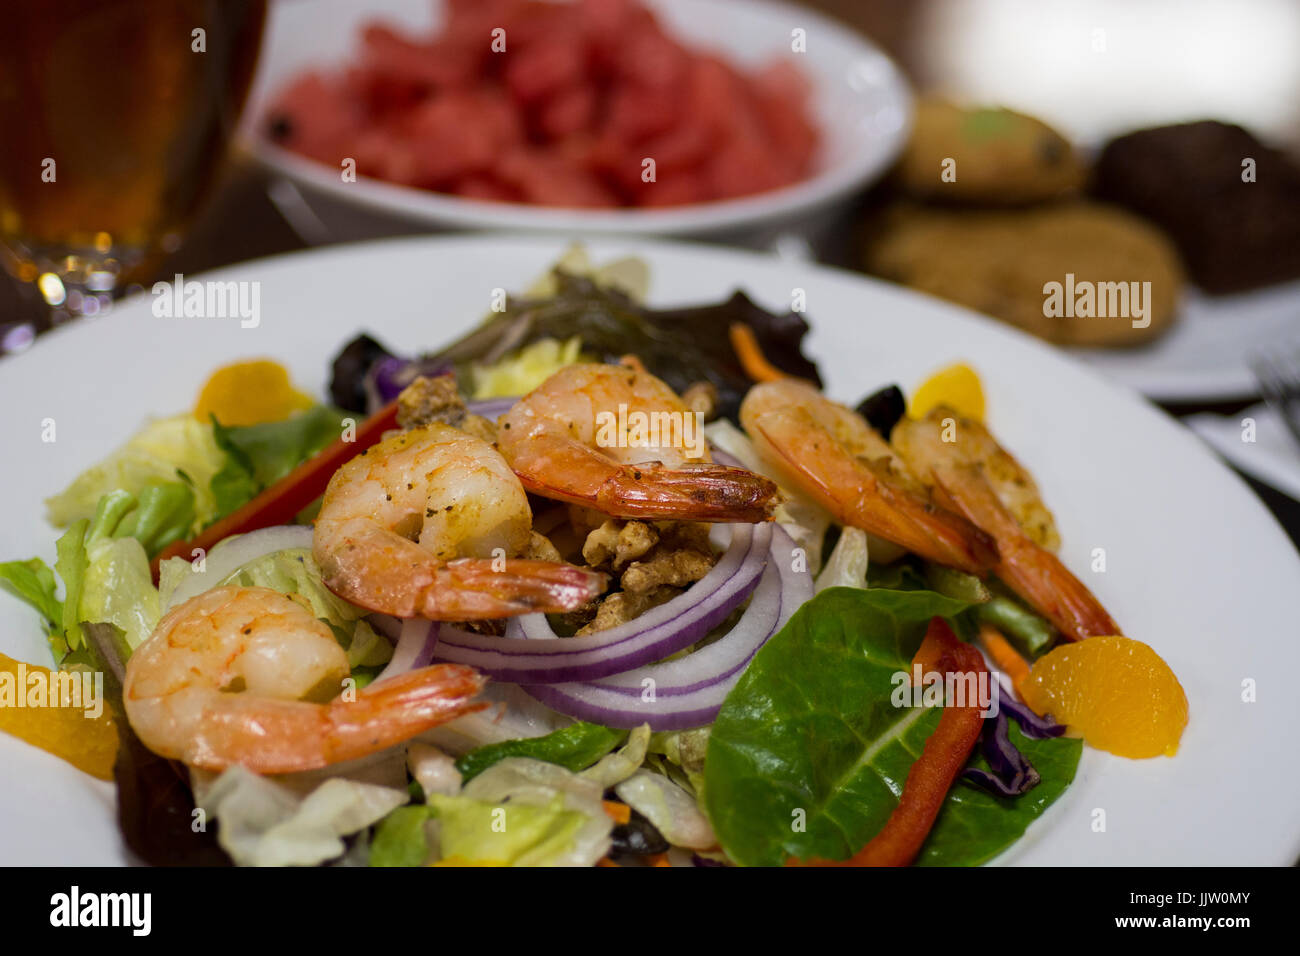 Lunch, Mandarin orange shrimp salad with candied walnuts, watermelon and cookies. Stock Photo